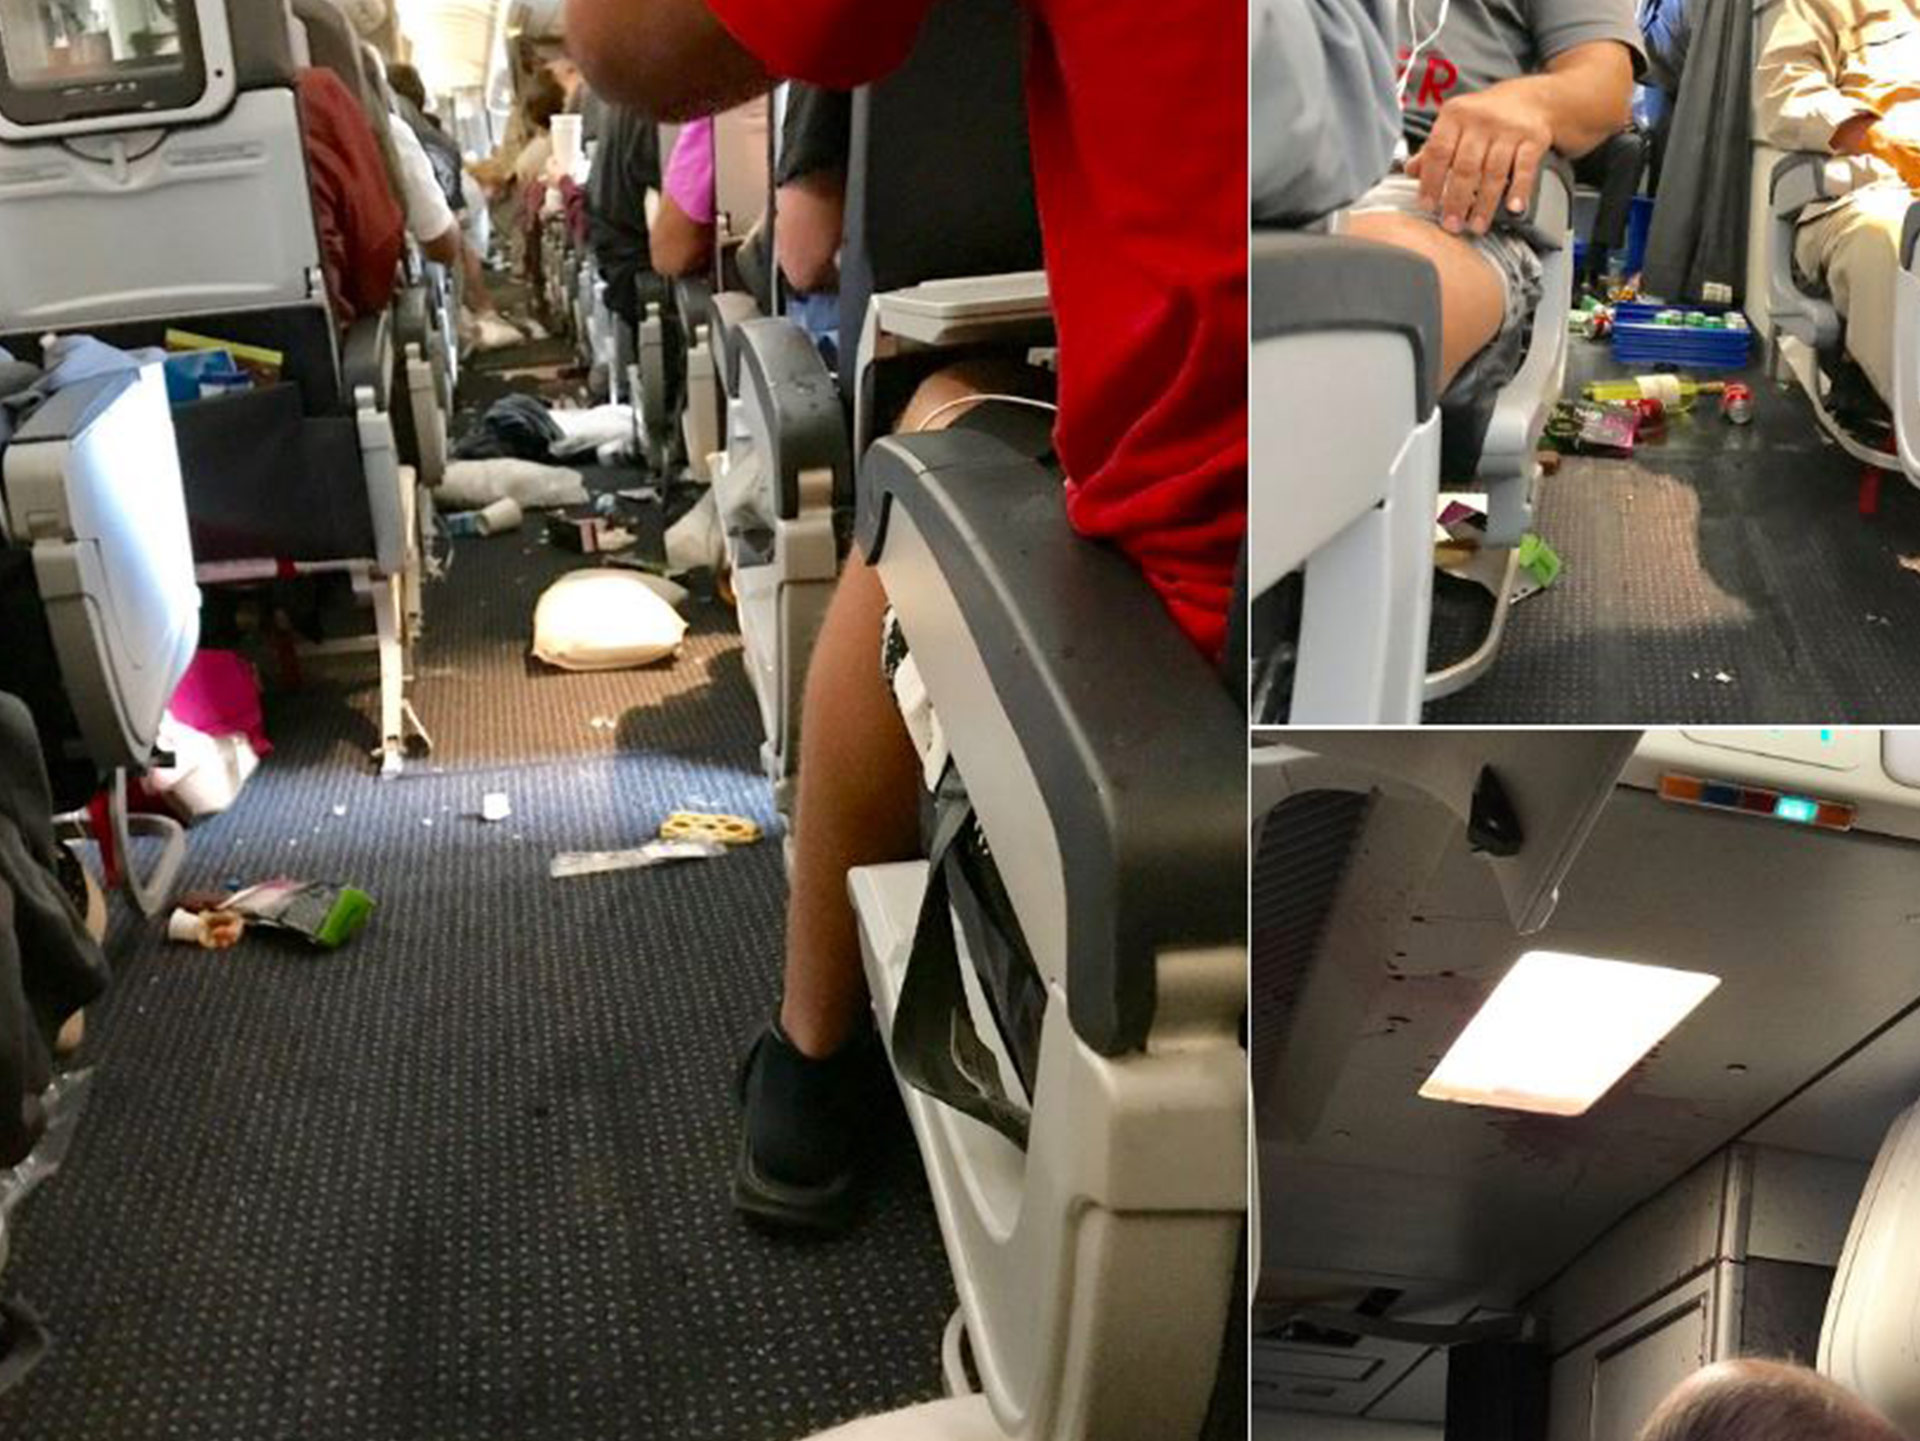 10 people in hospital after serious turbulence on American Airlines flight